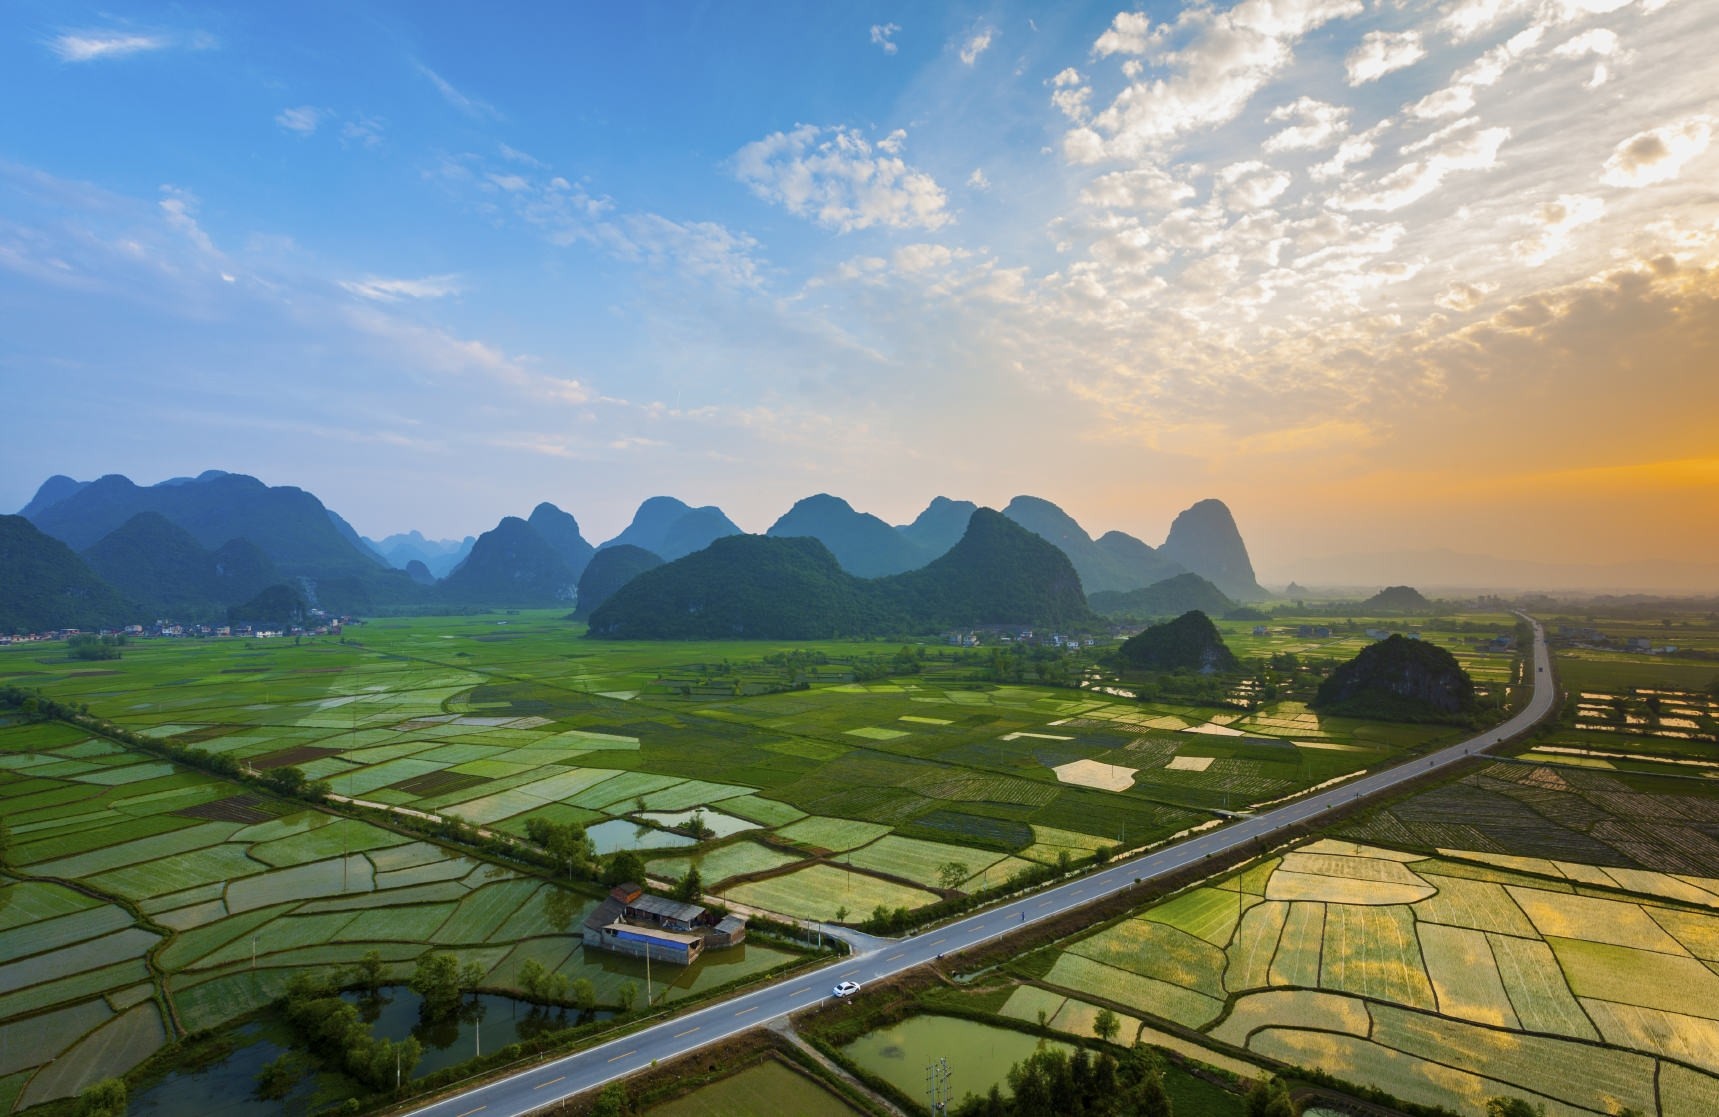 General 1719x1117 landscape photography field mountains sunset road clouds village Guilin China rice fields Agro (Plants) sky Asia